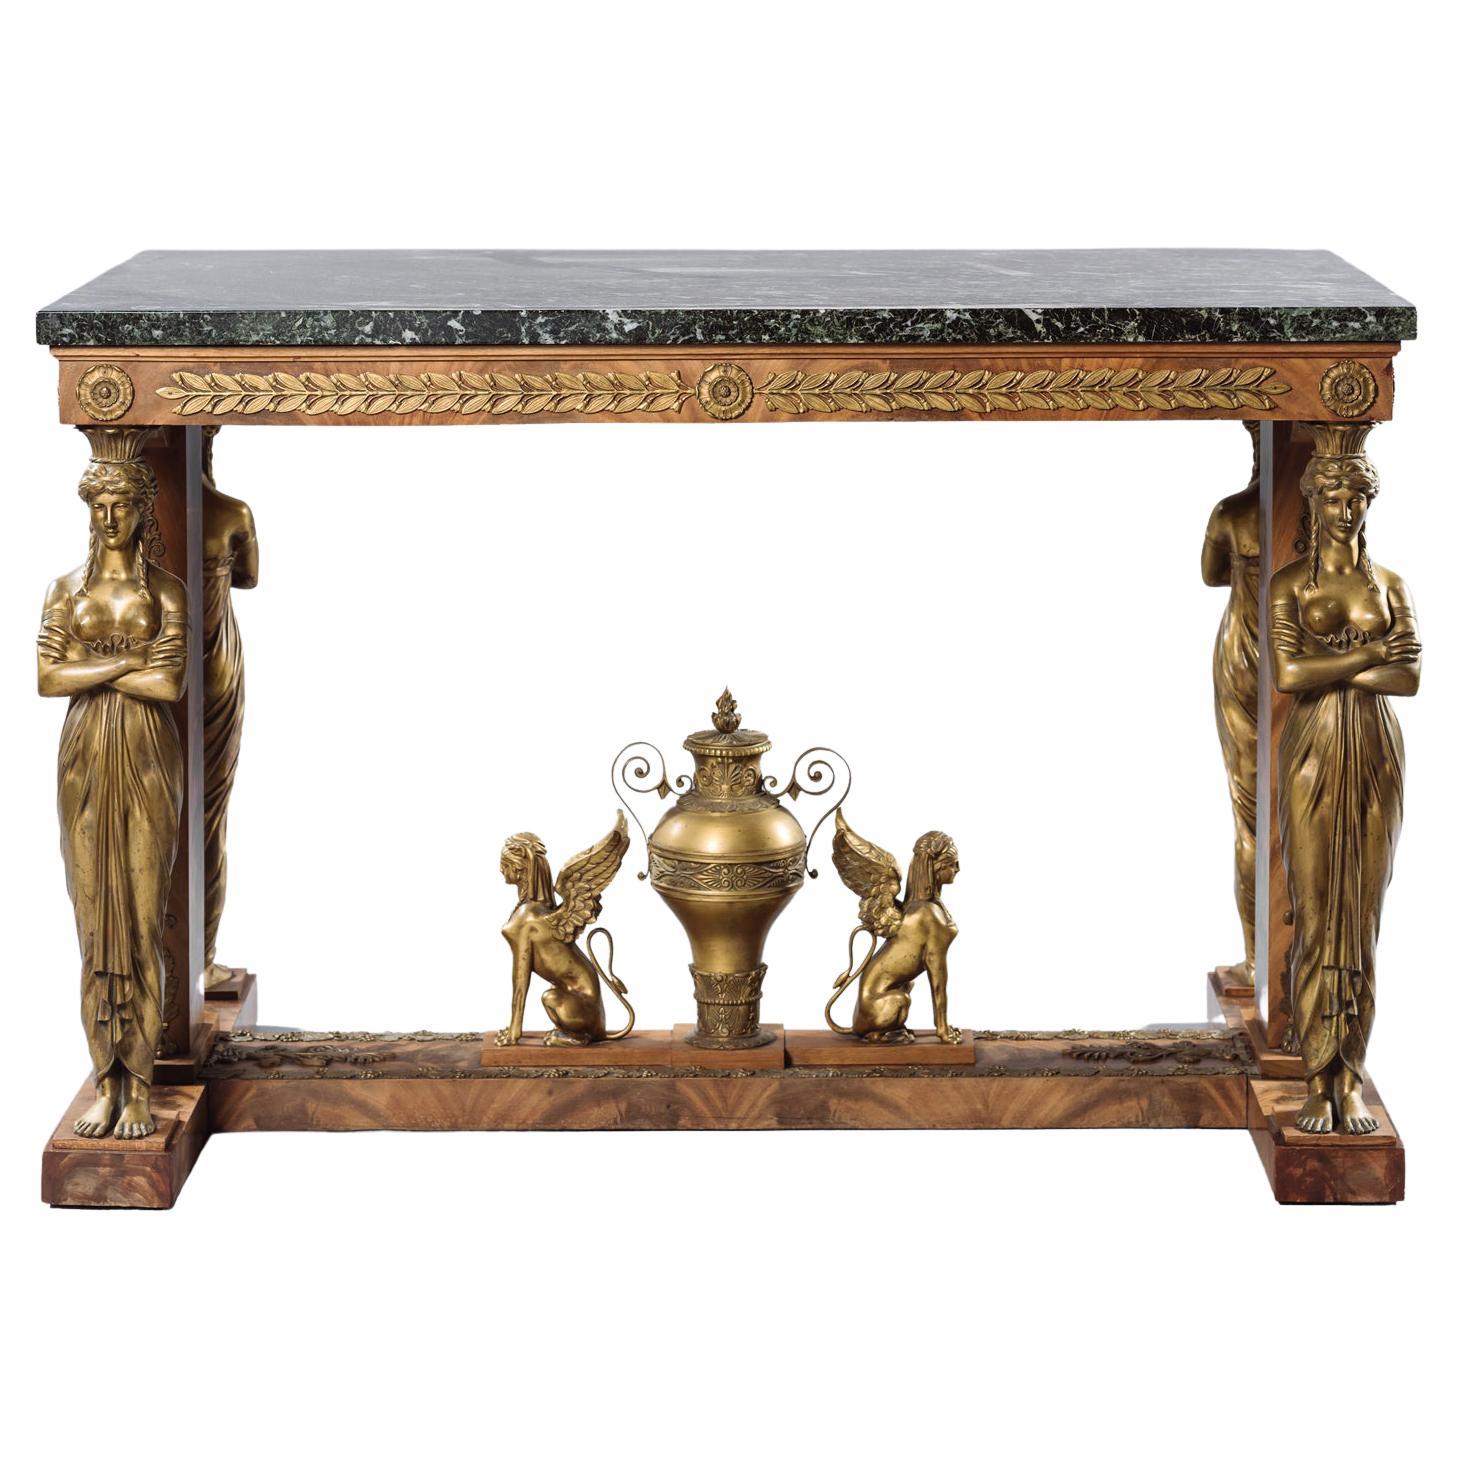 Empire Style Mahogany Table de Milieu with a Verde Antico Marble Top For Sale